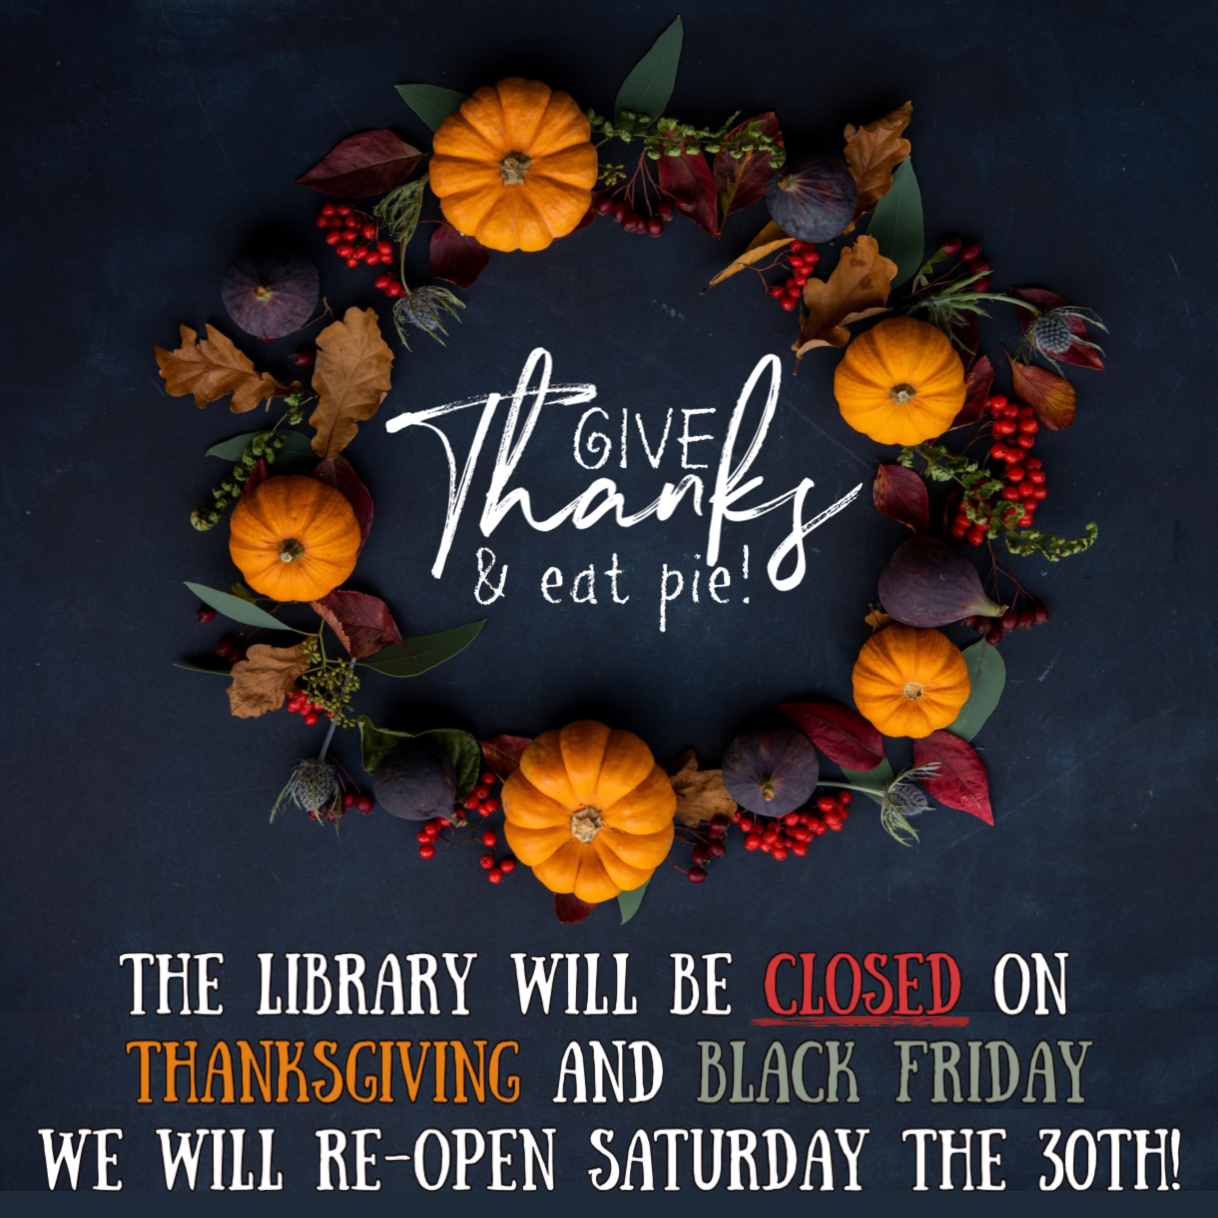 The Library will be closed on Thanksgiving & Black Friday; we will re-open Saturday the 30th